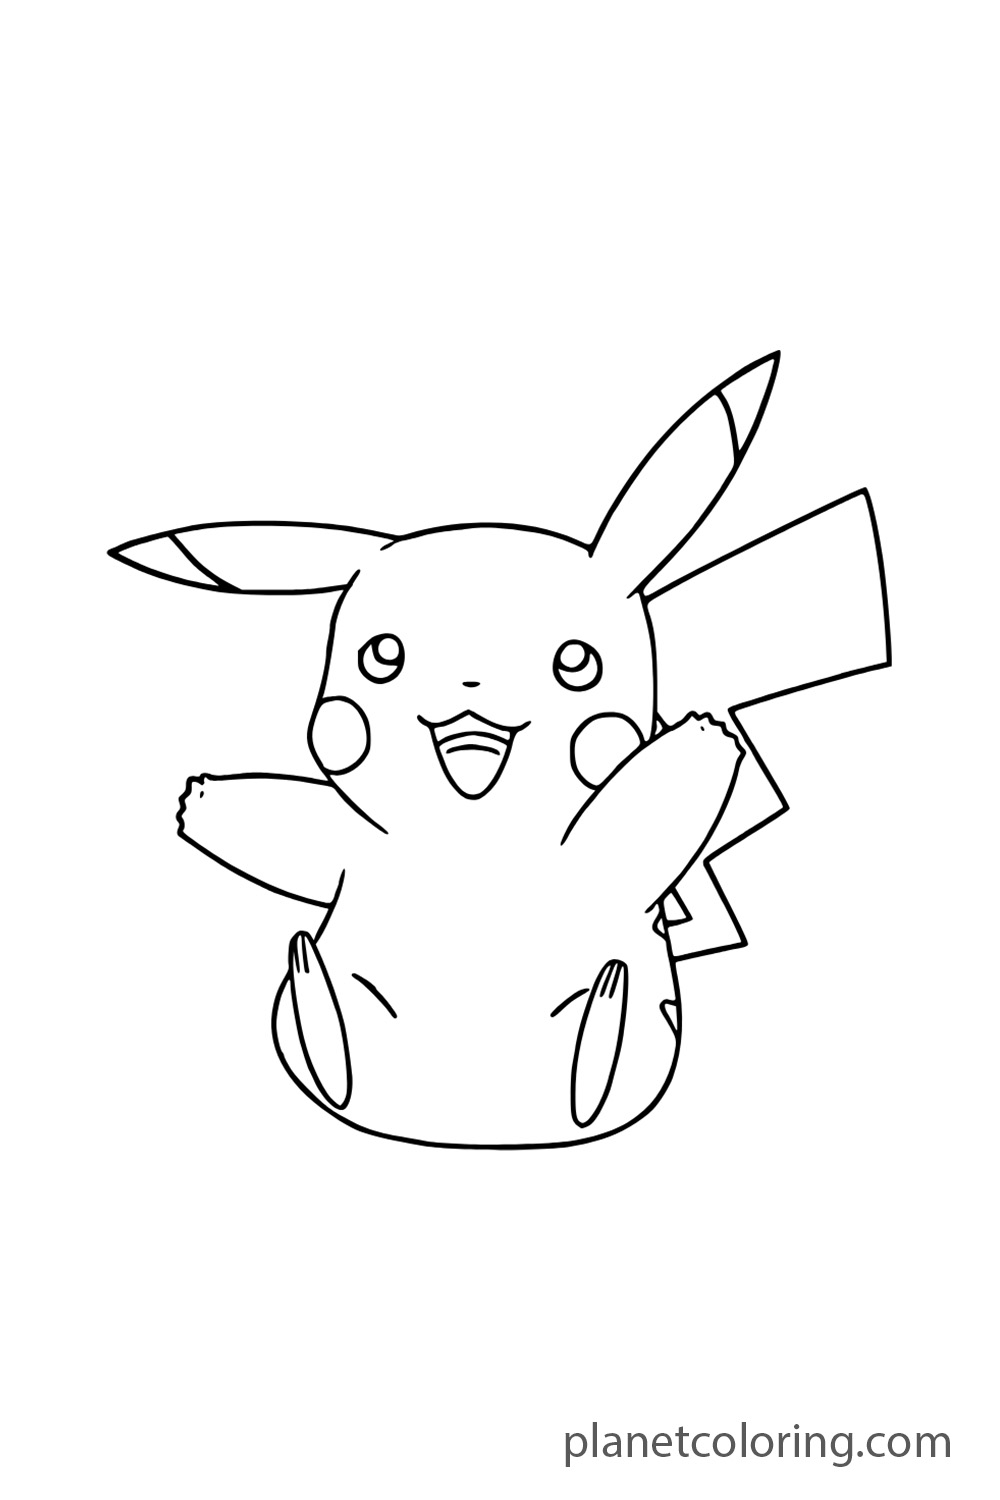 Pikachu in a cheerful pose